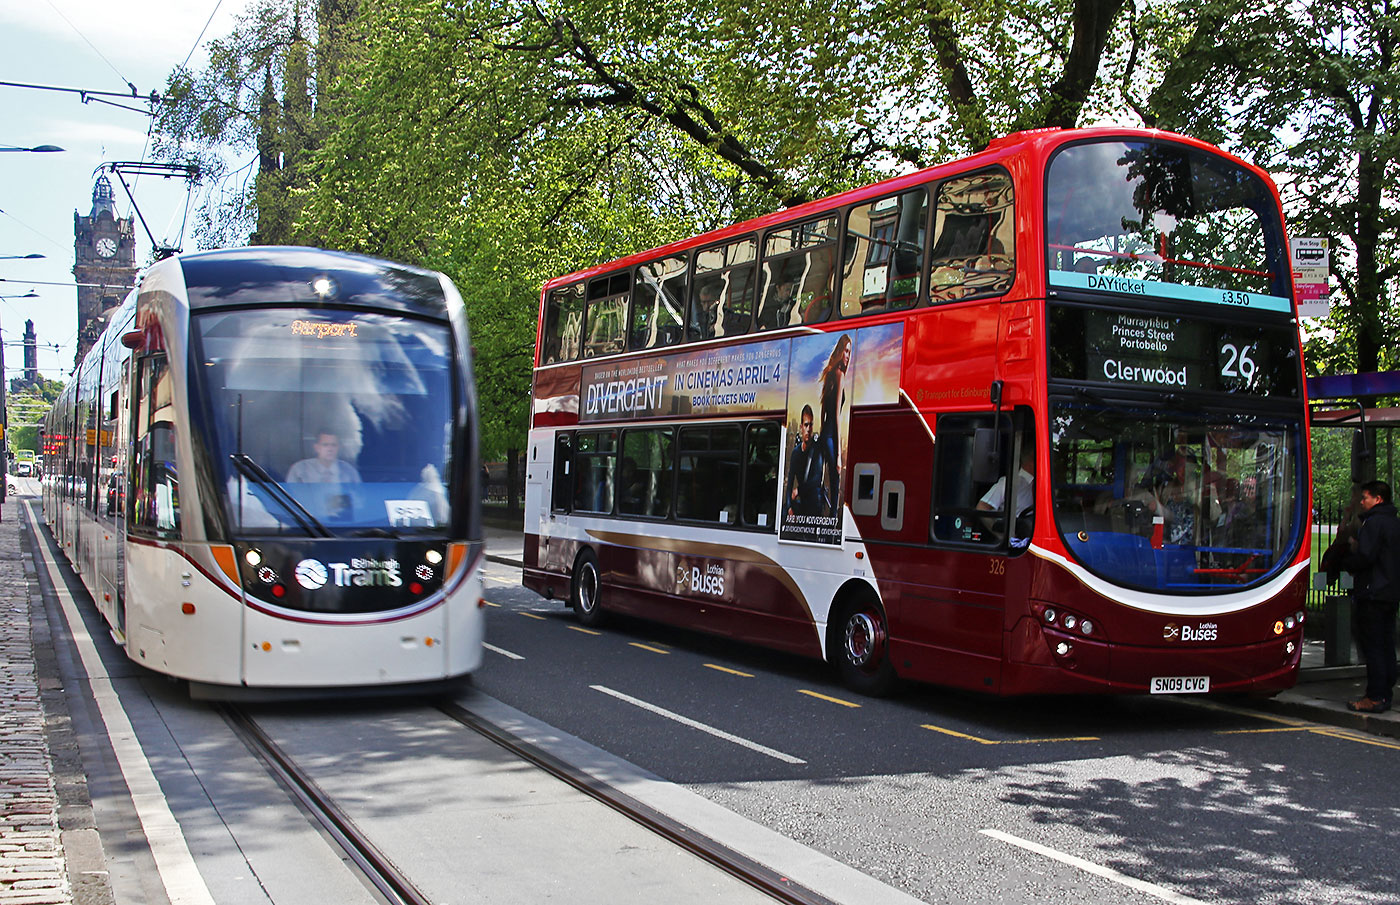 Tram and Bus in Princes Street, mid-March 2014.  The bus is in the branded  livery for Route 22